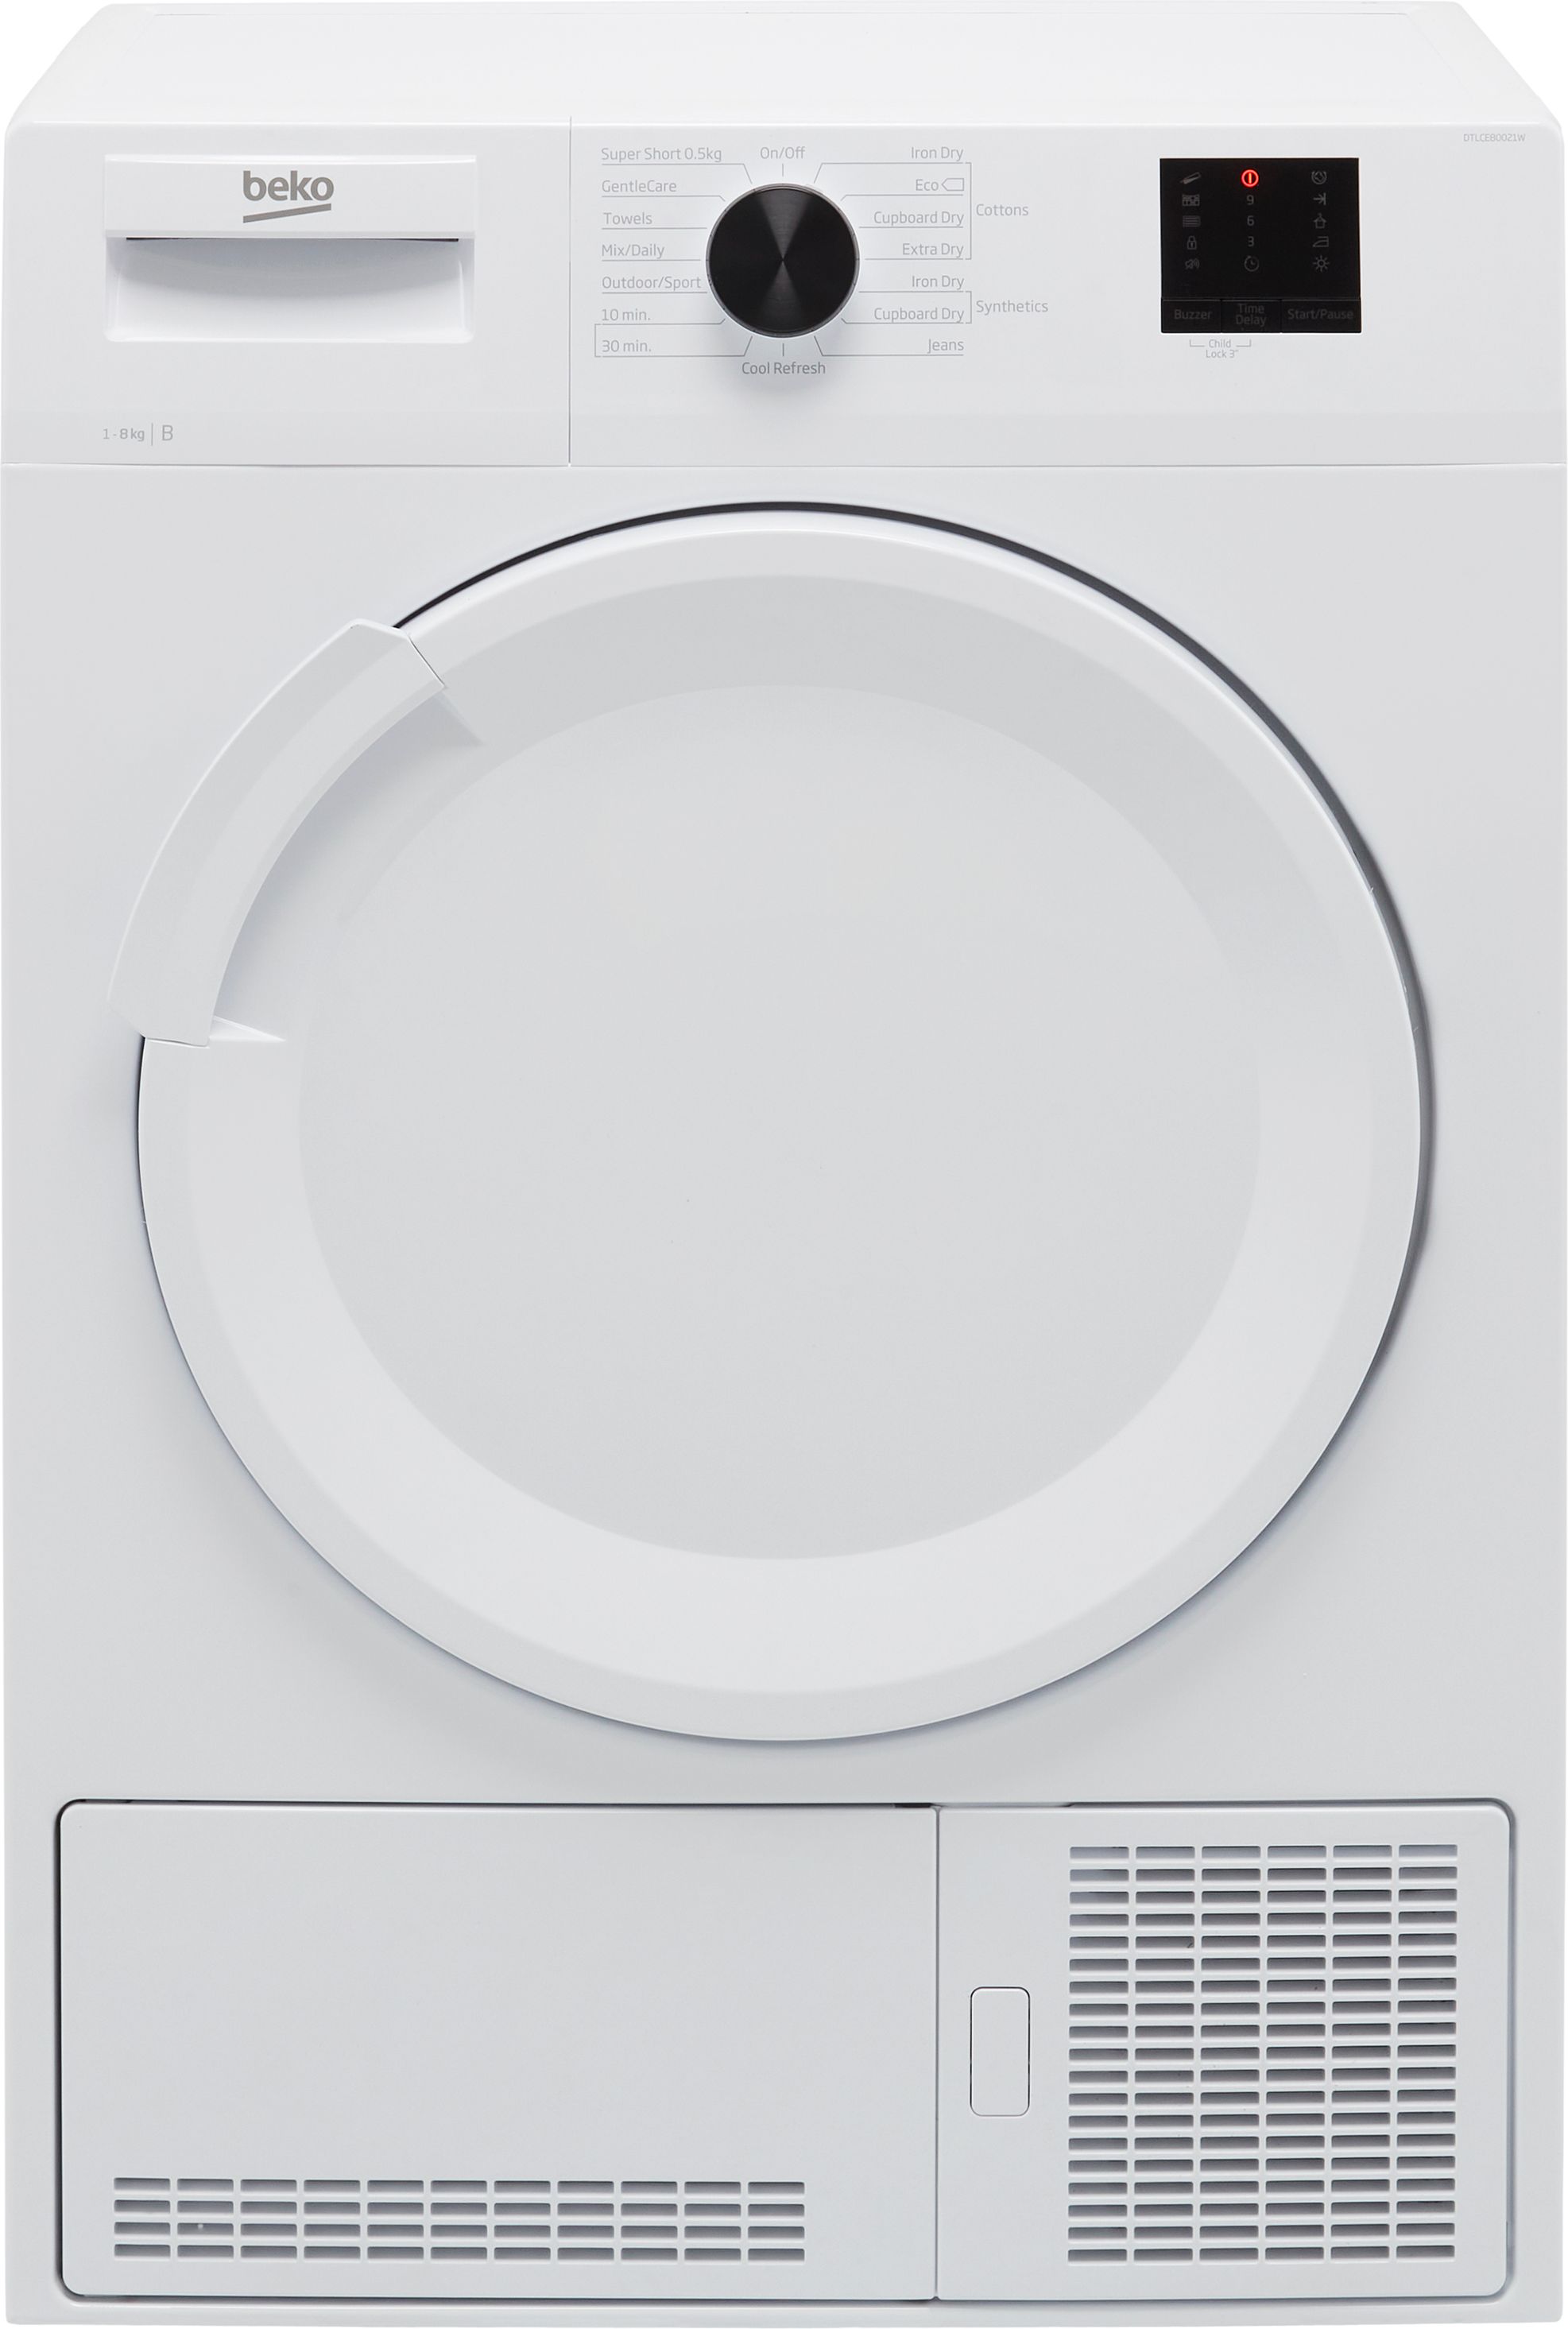 Beko DTLCE80021W 8Kg Condenser Tumble Dryer - White - B Rated